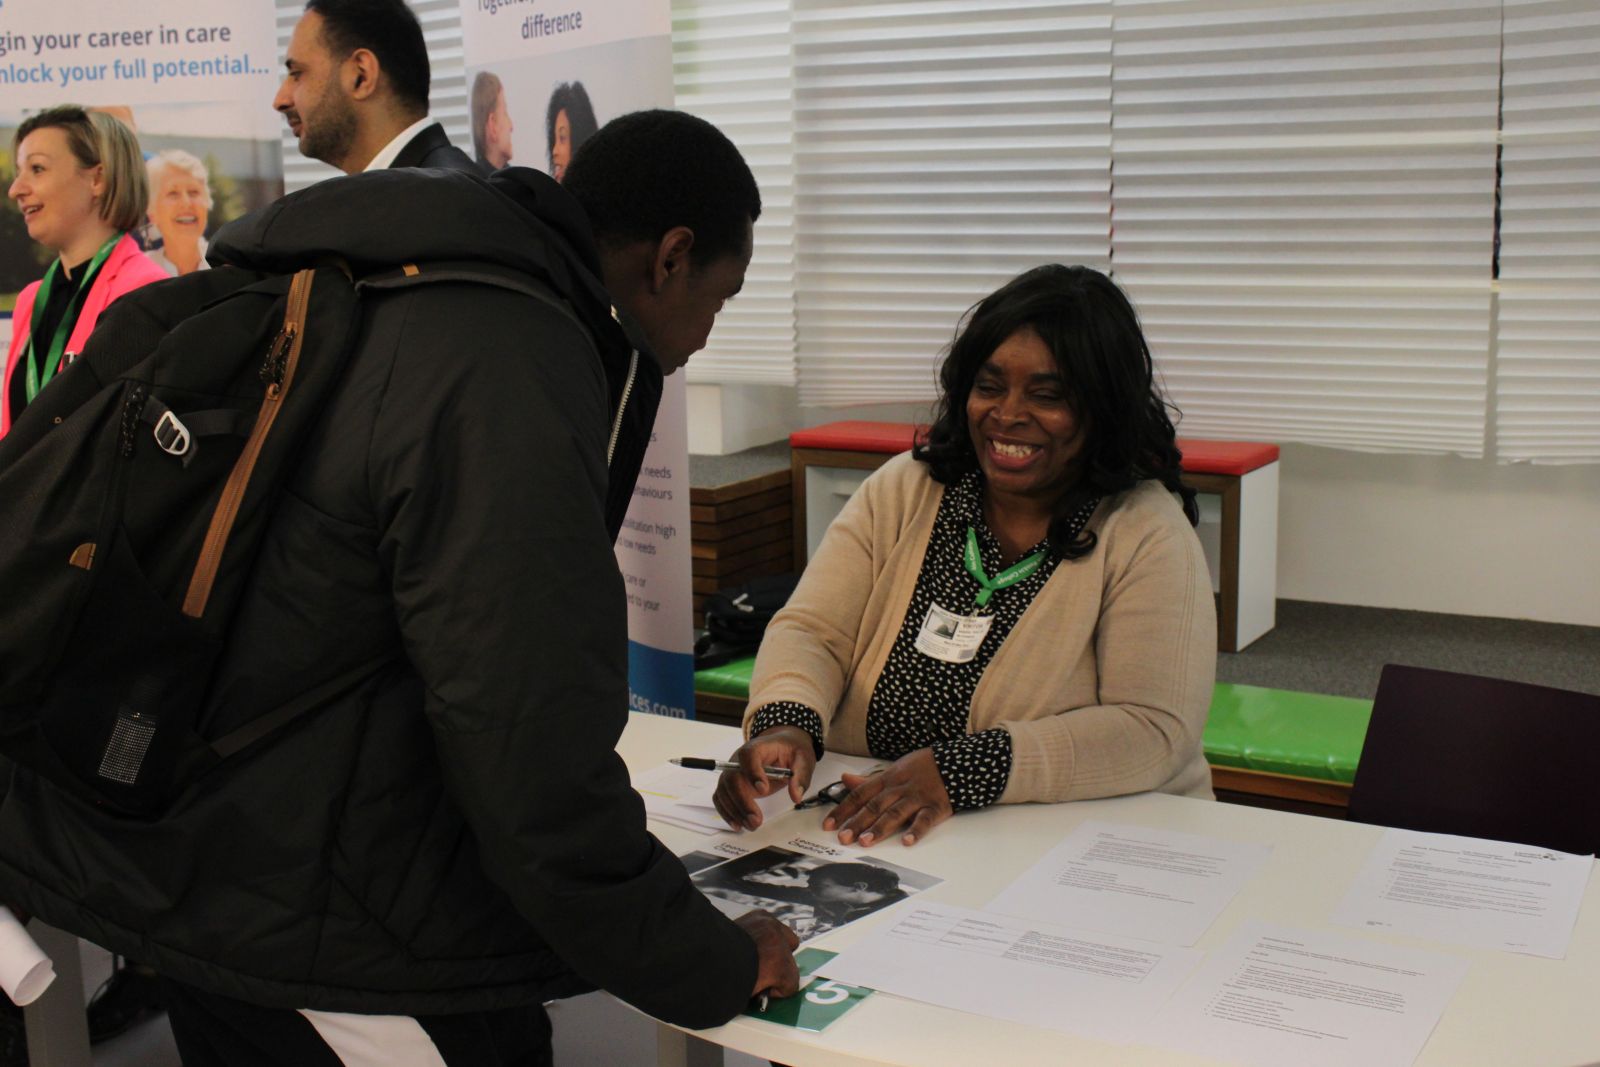 Employer talking to student at careers fair